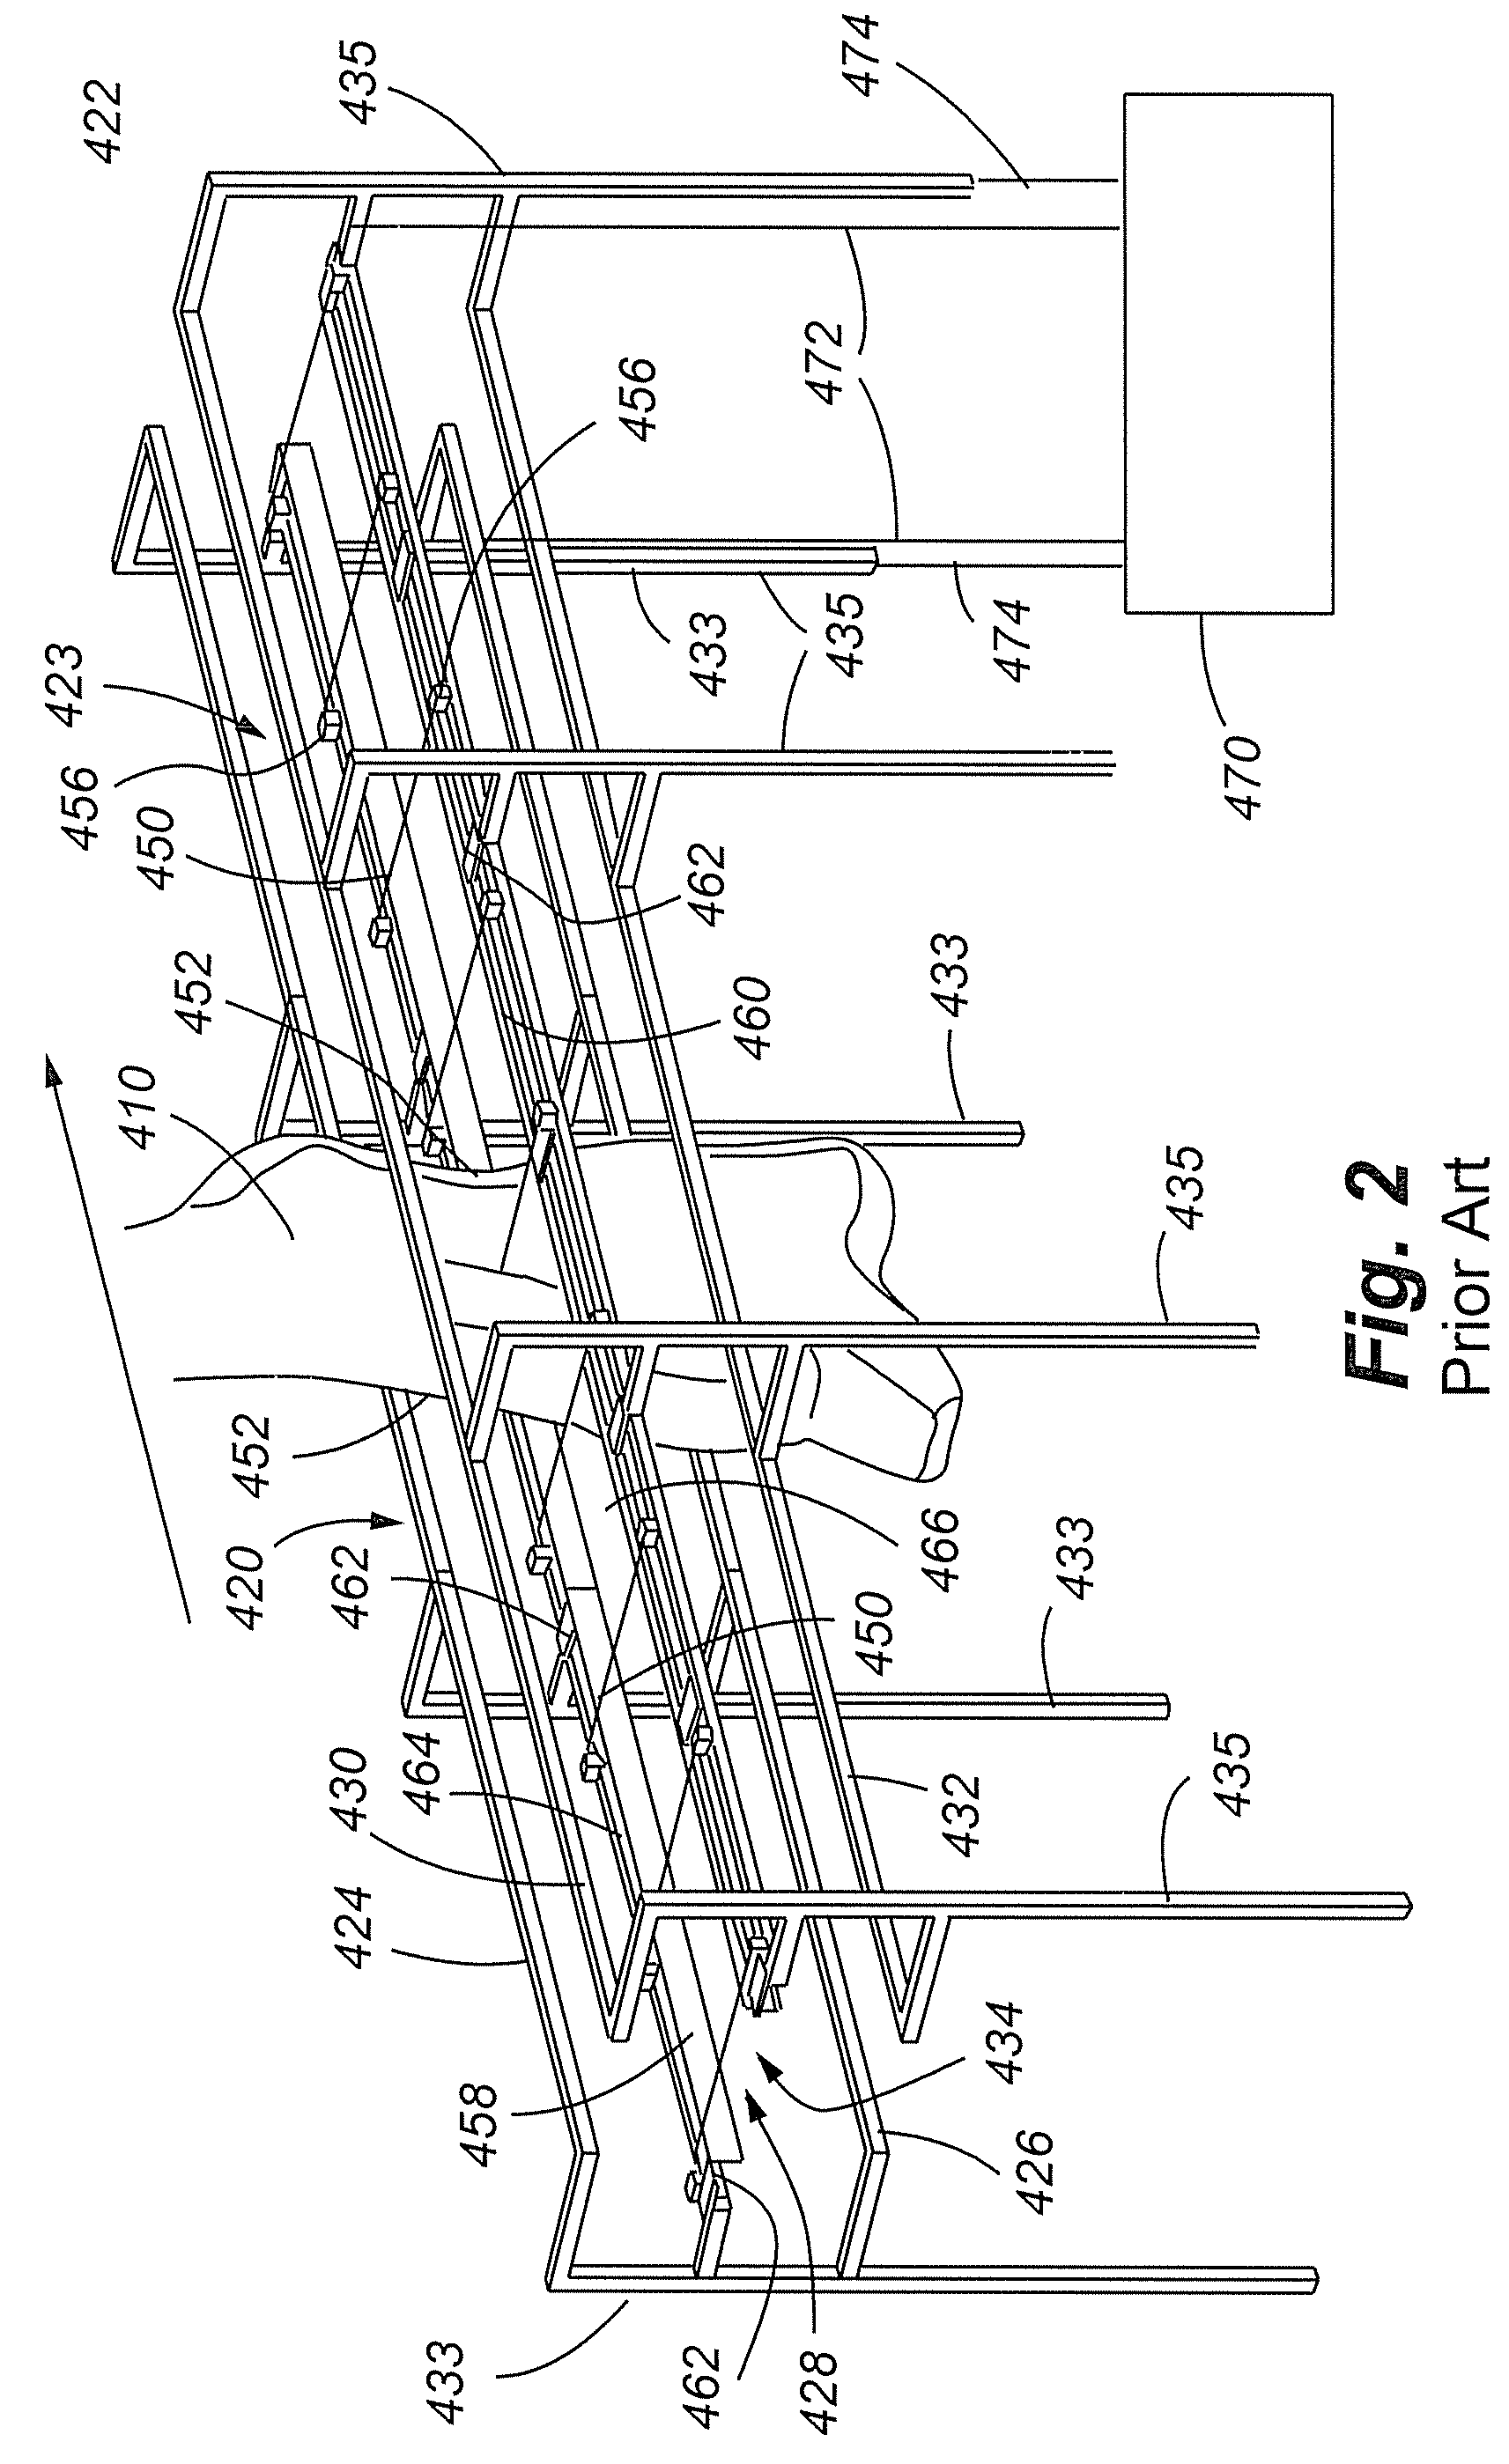 Multibar apparatus and method for electrically stimulating a carcass